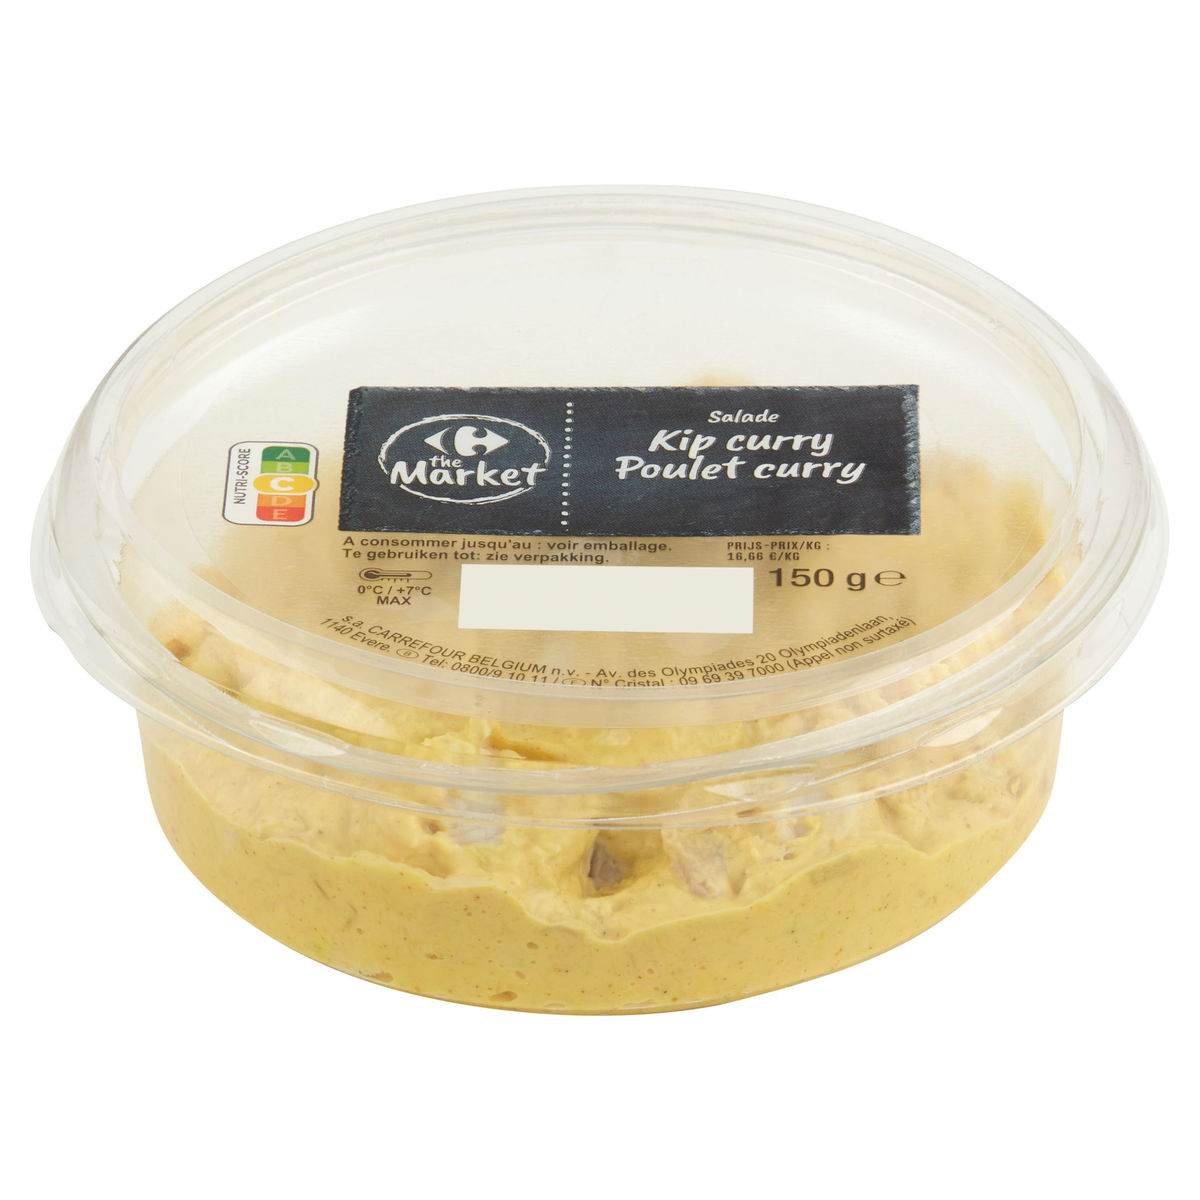 Carrefour The Market Salade Poulet Curry 150 g